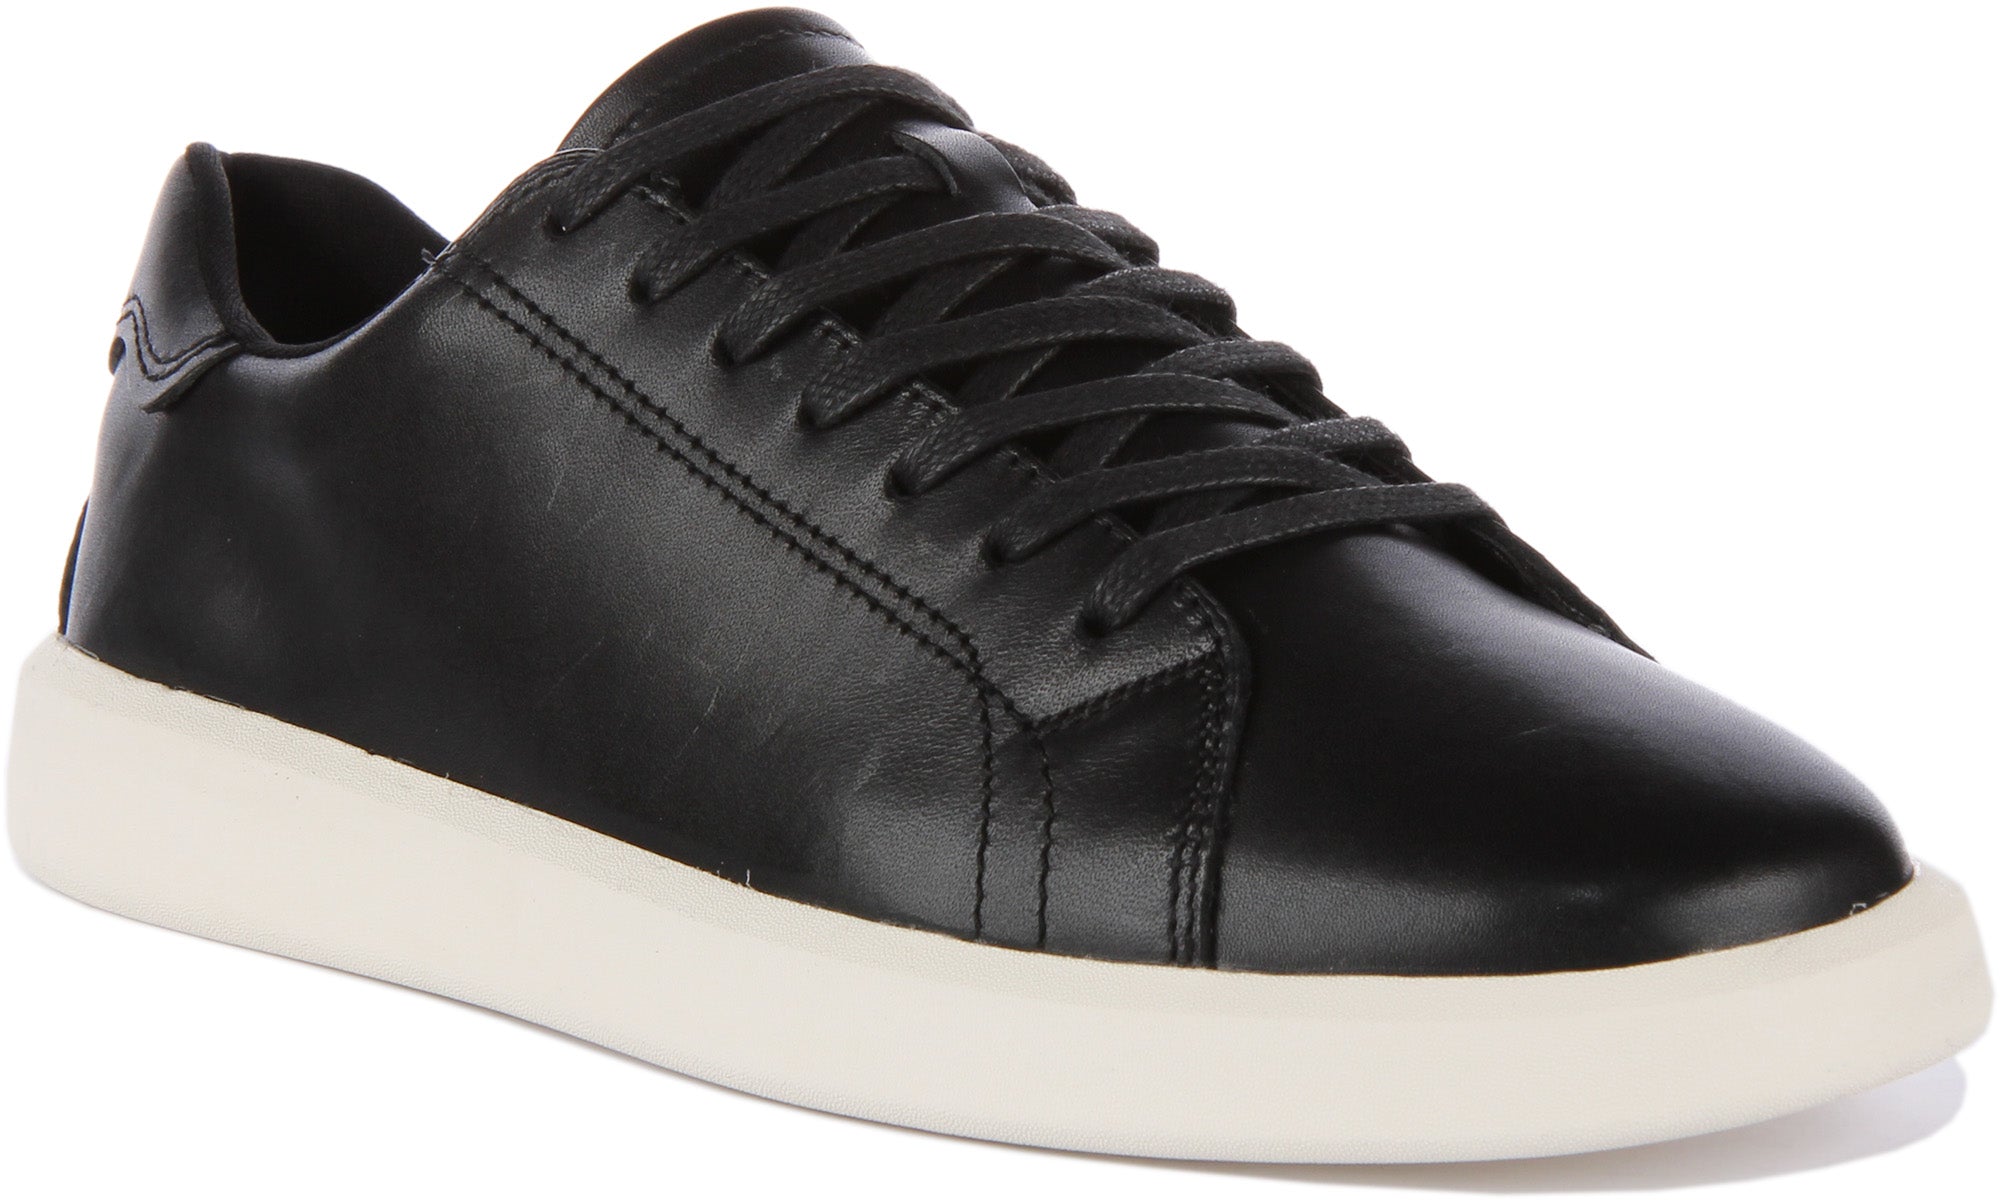 Vagabond Maya In Black White For Women | Lace Up Low Top Trainer ...